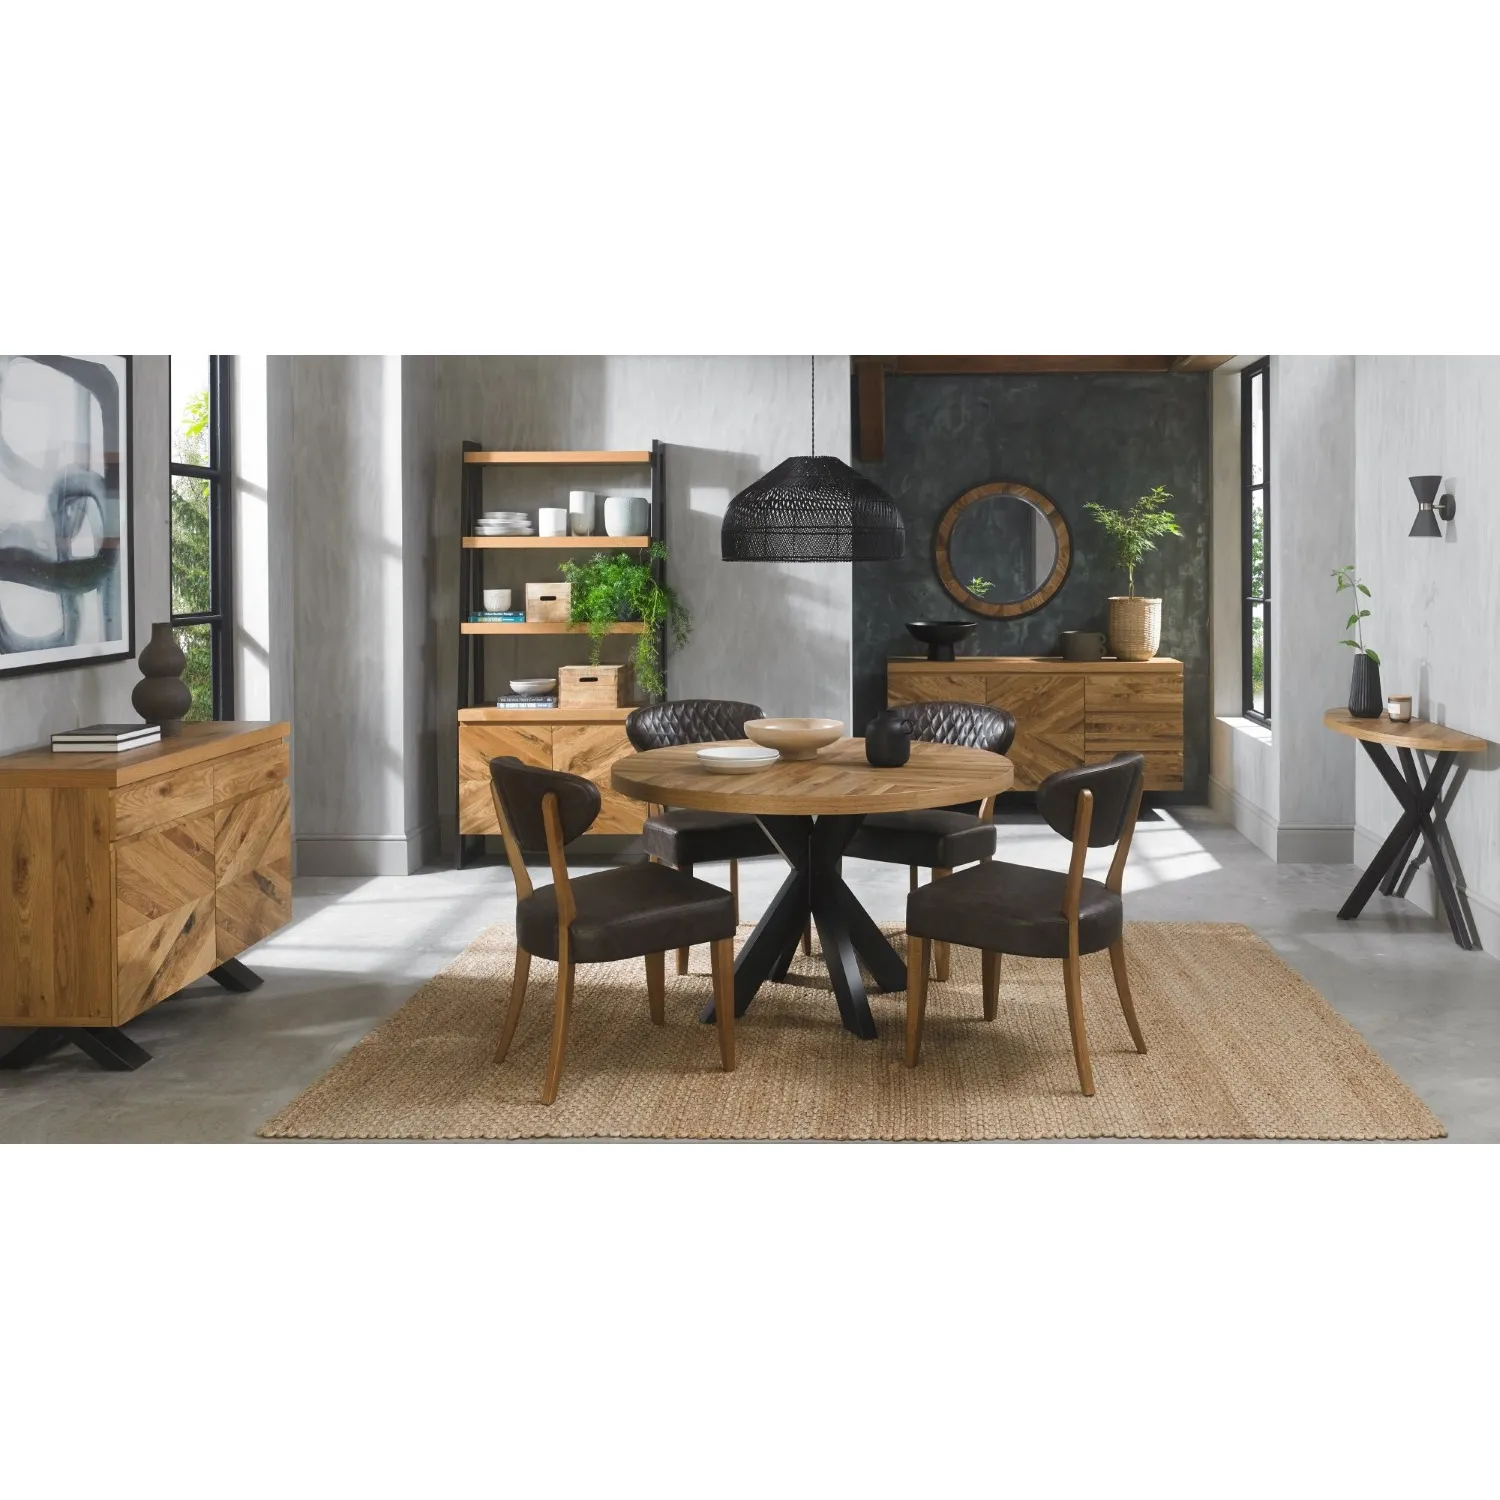 Rustic Oak Small Round Dining Table + 4 Leather Chairs